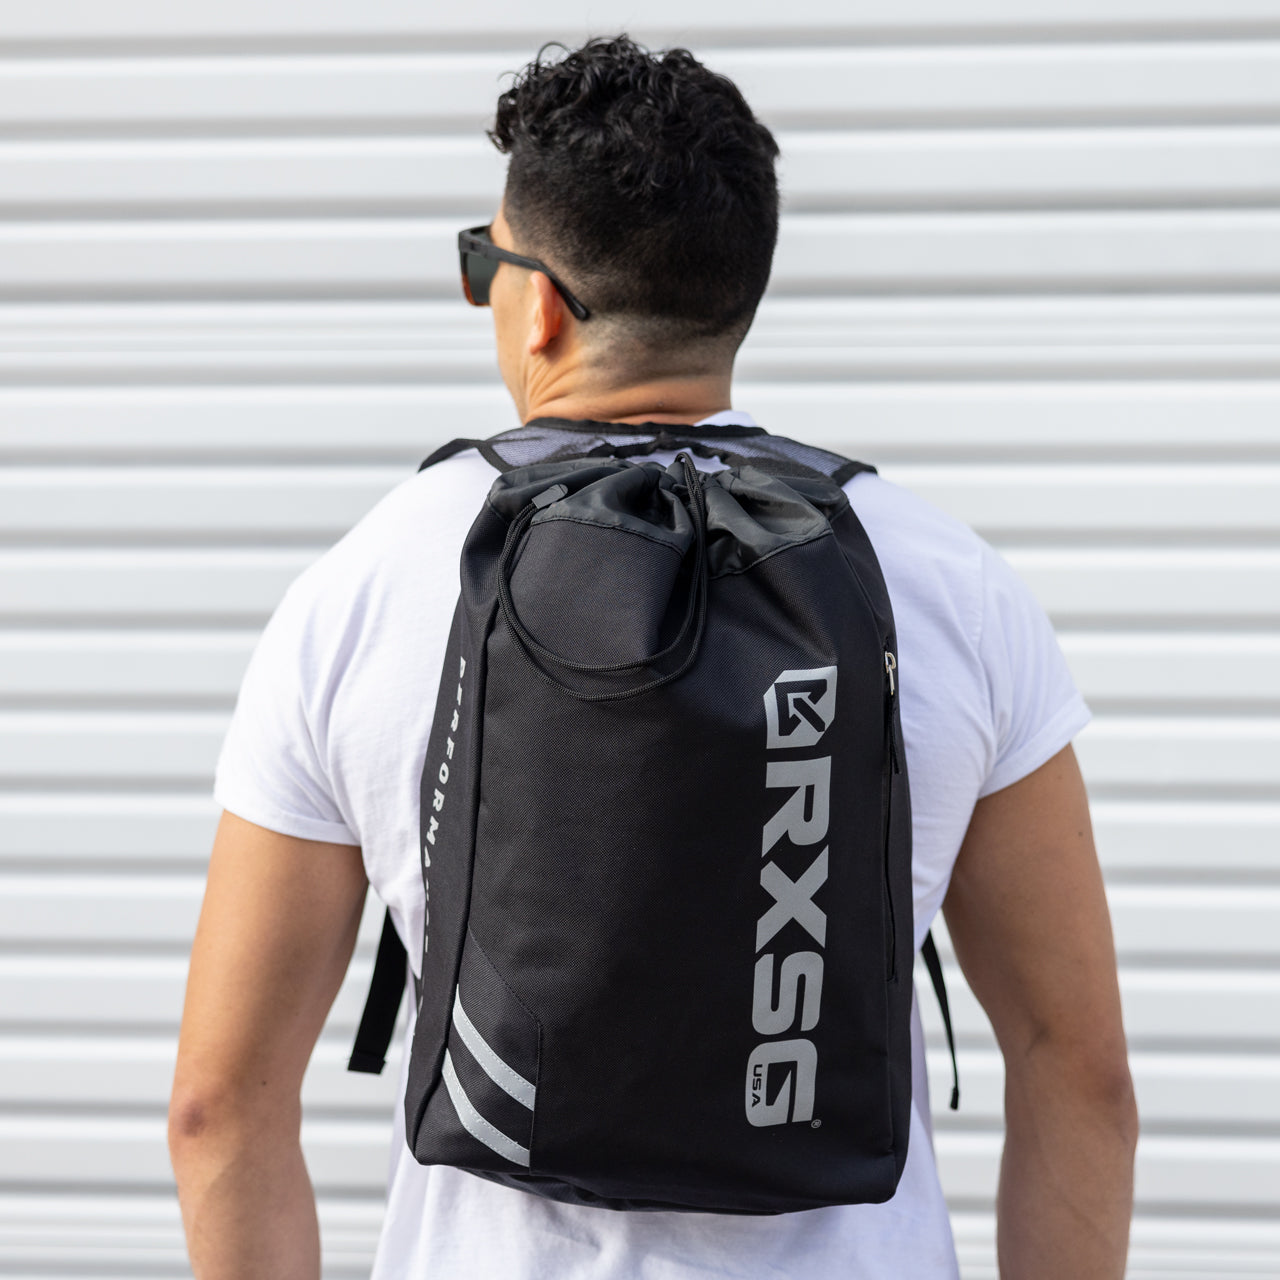 RXSG Drawstring Backpack on someone's back